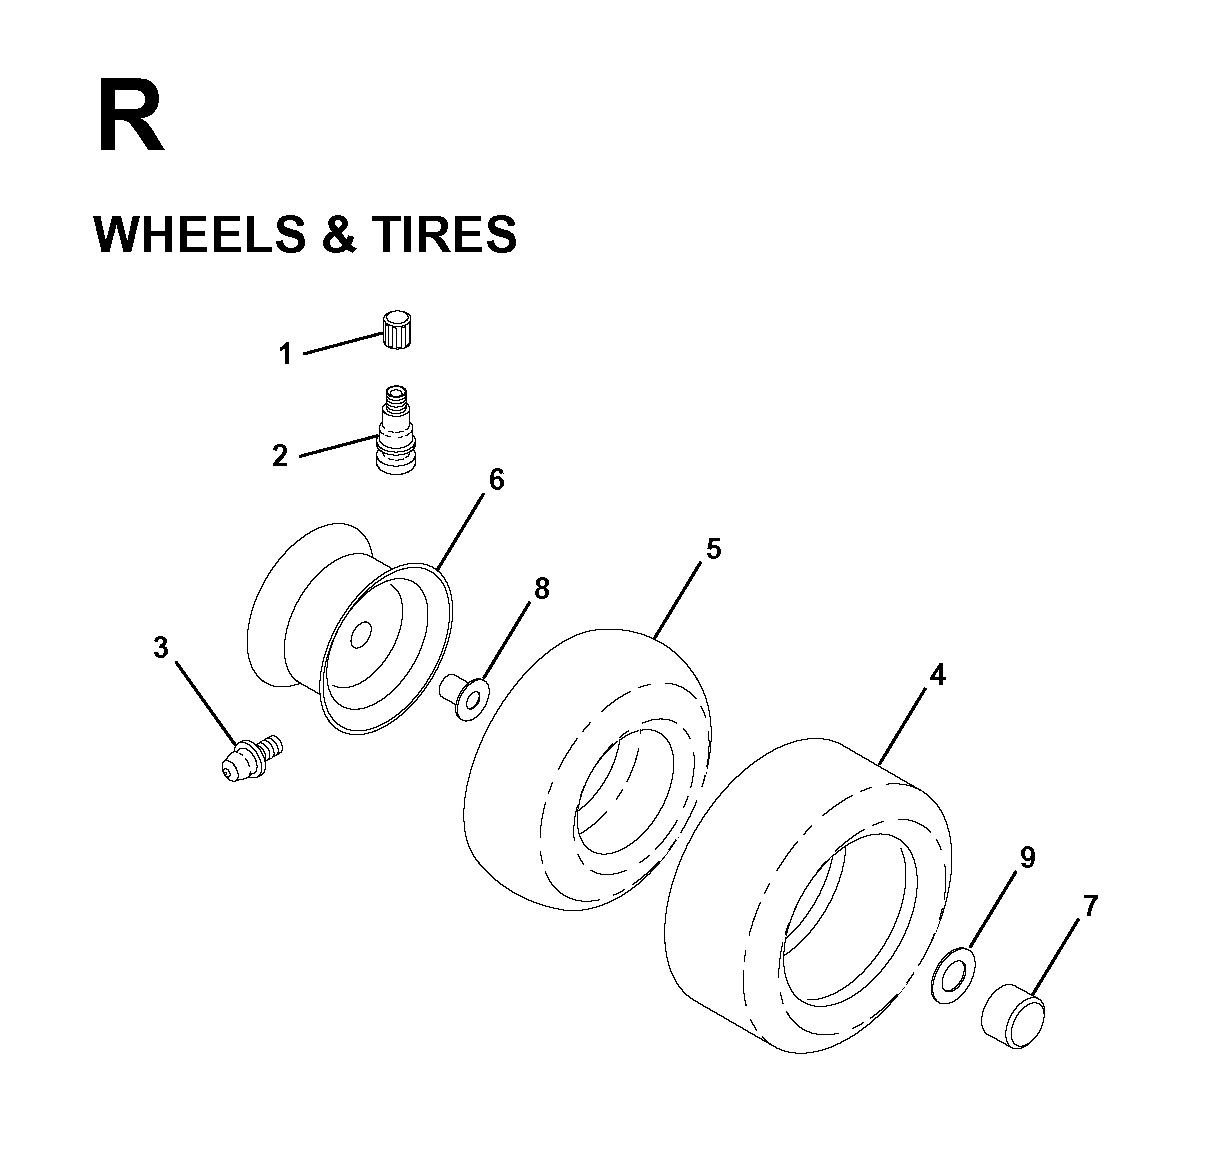 Wheels and tires 532059192, 532065139, 532000278, 532123410, 532106230, 532059904, 532008134, 532142039, 532141652, 532104757, 532009040, 532121748